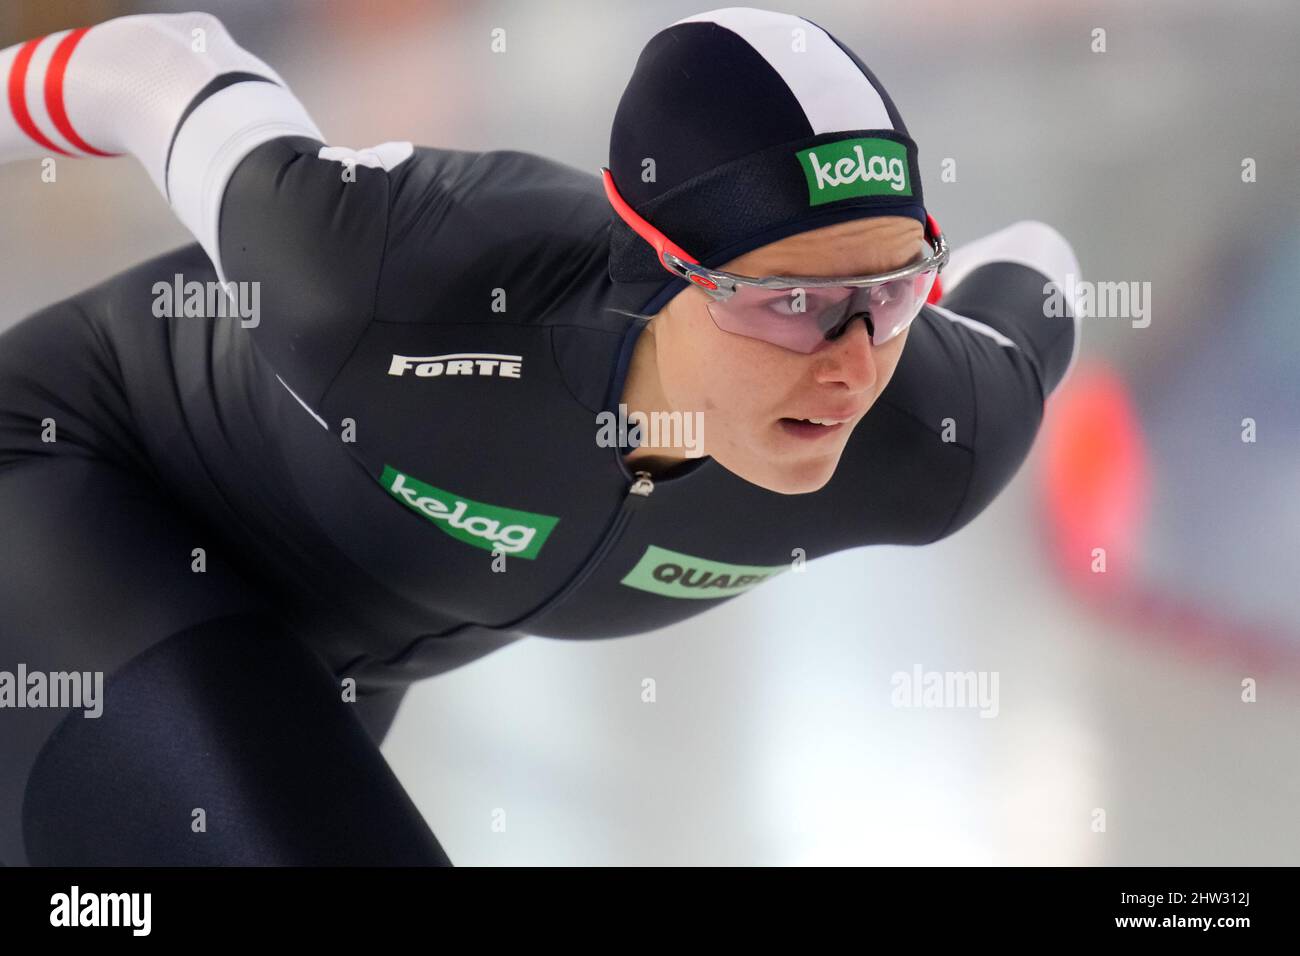 HAMAR, NORWAY - MARCH 3: Vanessa Herzog of Austria competing in the Women's 1000m during the ISU World Speed Skating Championships Sprint at the Vikingskipet on March 3, 2022 in Hamar, Norway (Photo by Douwe Bijlsma/Orange Pictures) Stock Photo